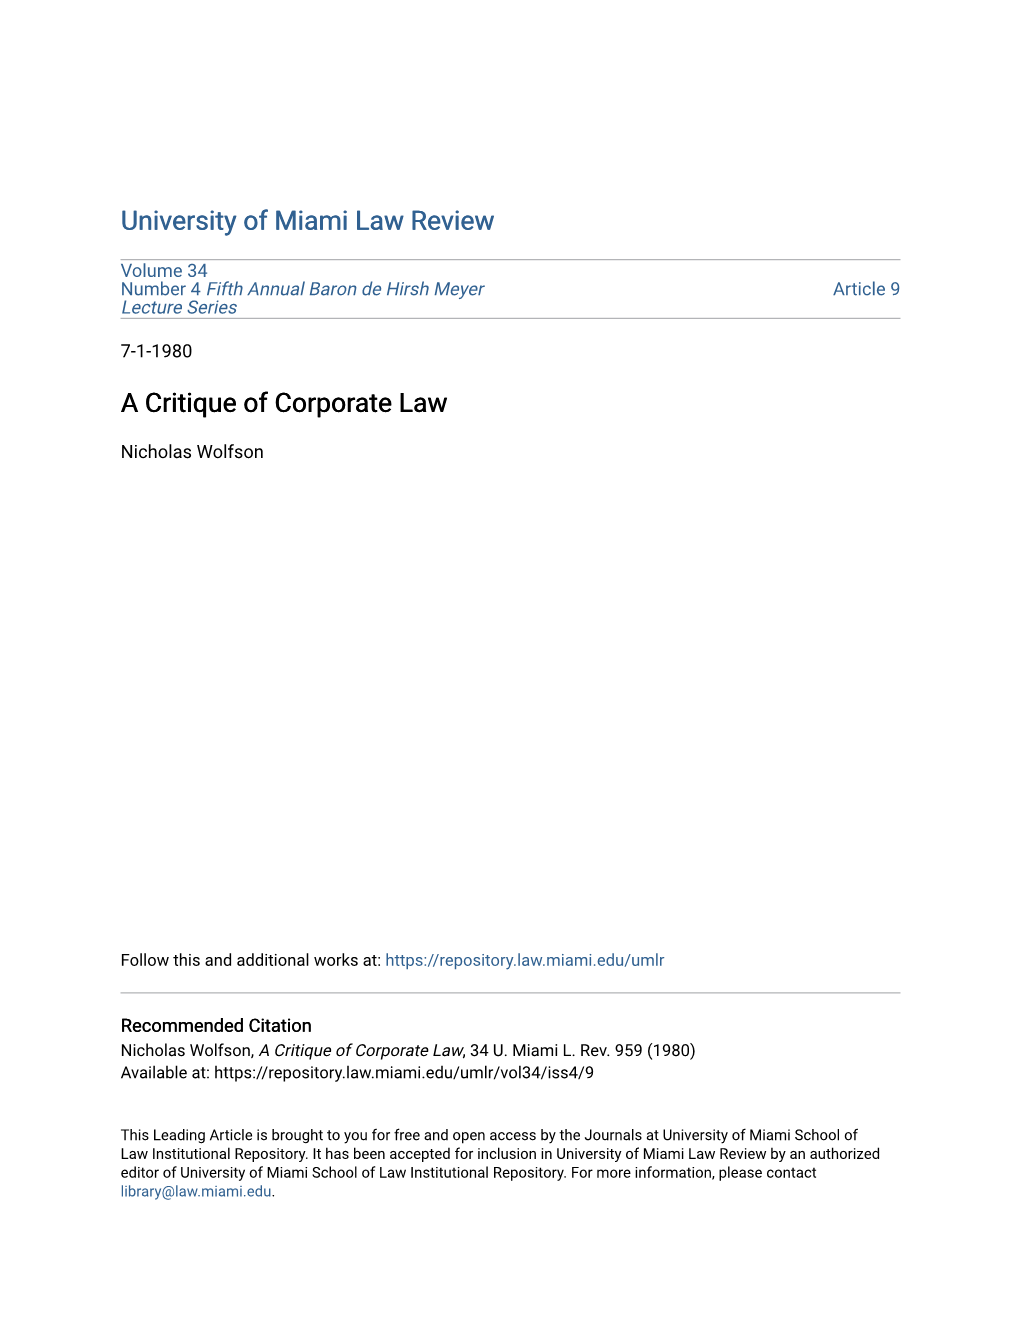 A Critique of Corporate Law